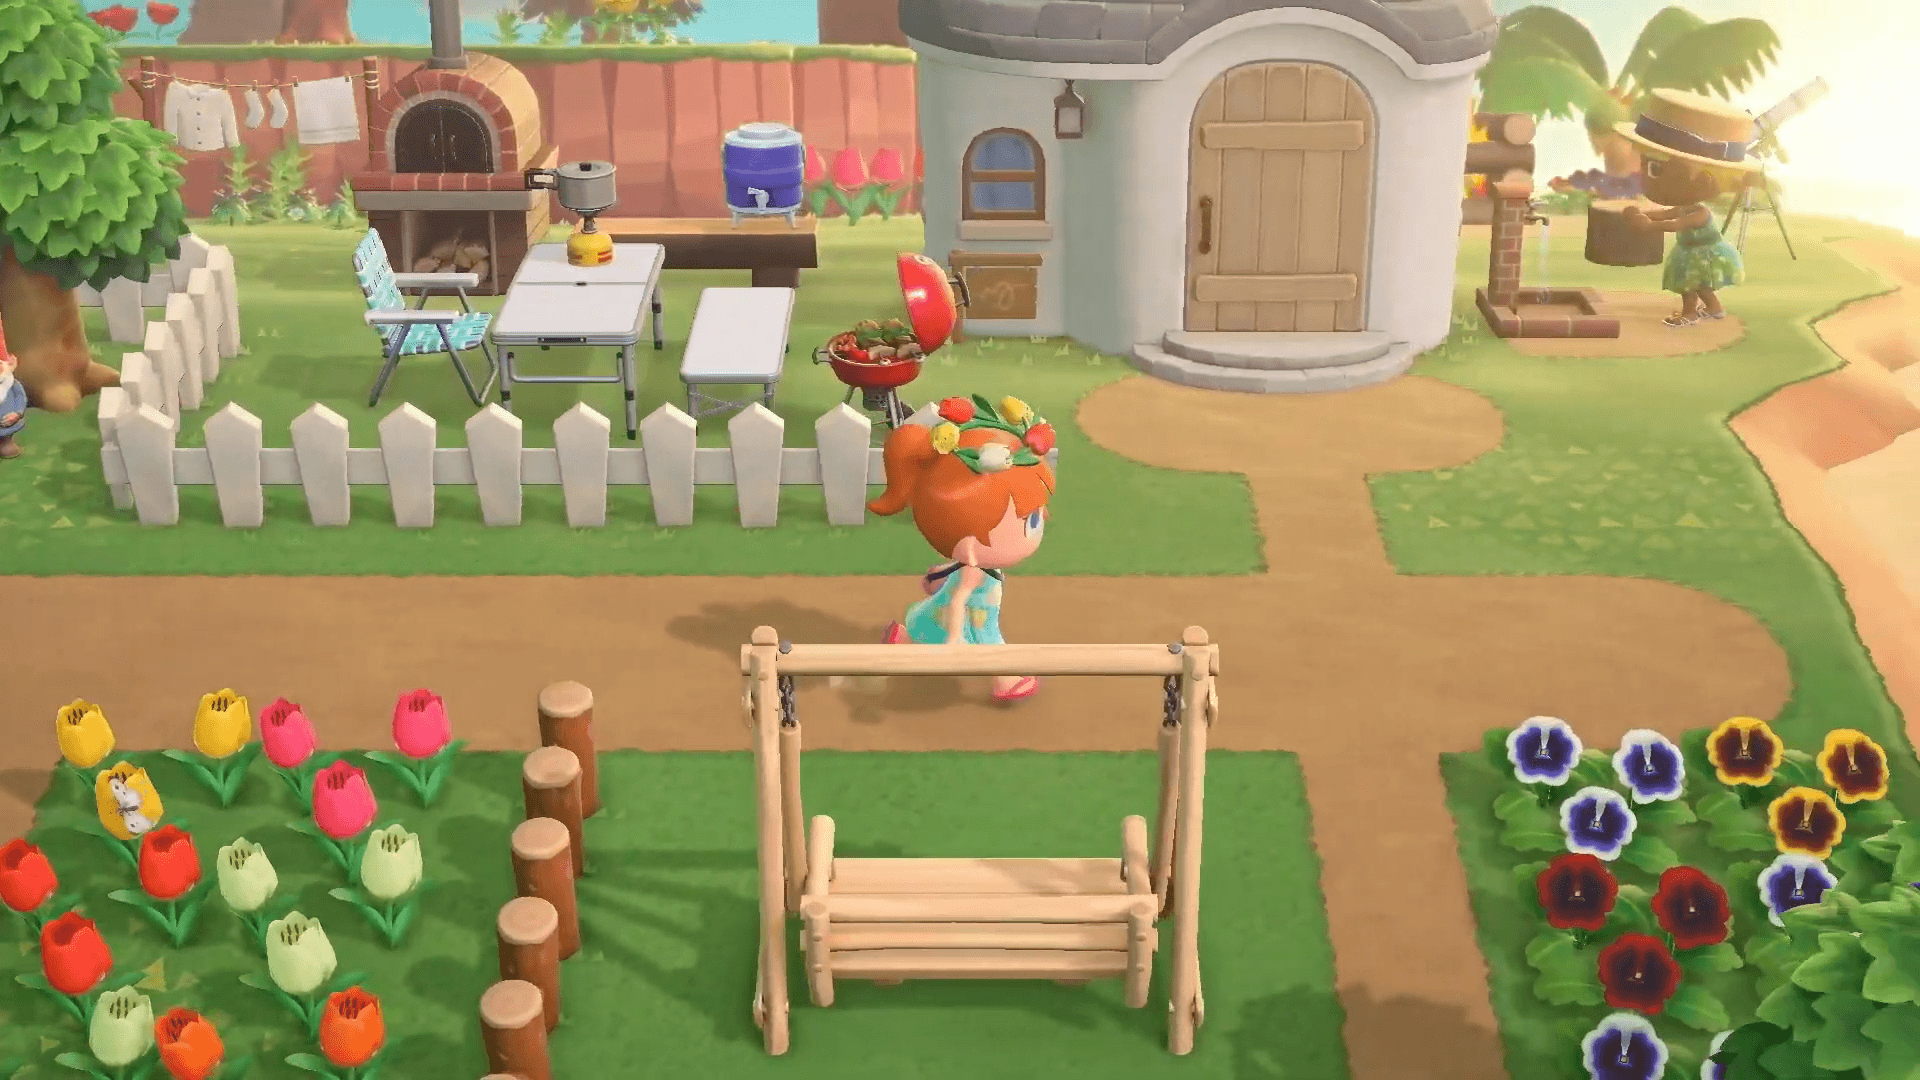 Nintendo Confirms New Details About Multiplayer in Animal Crossing